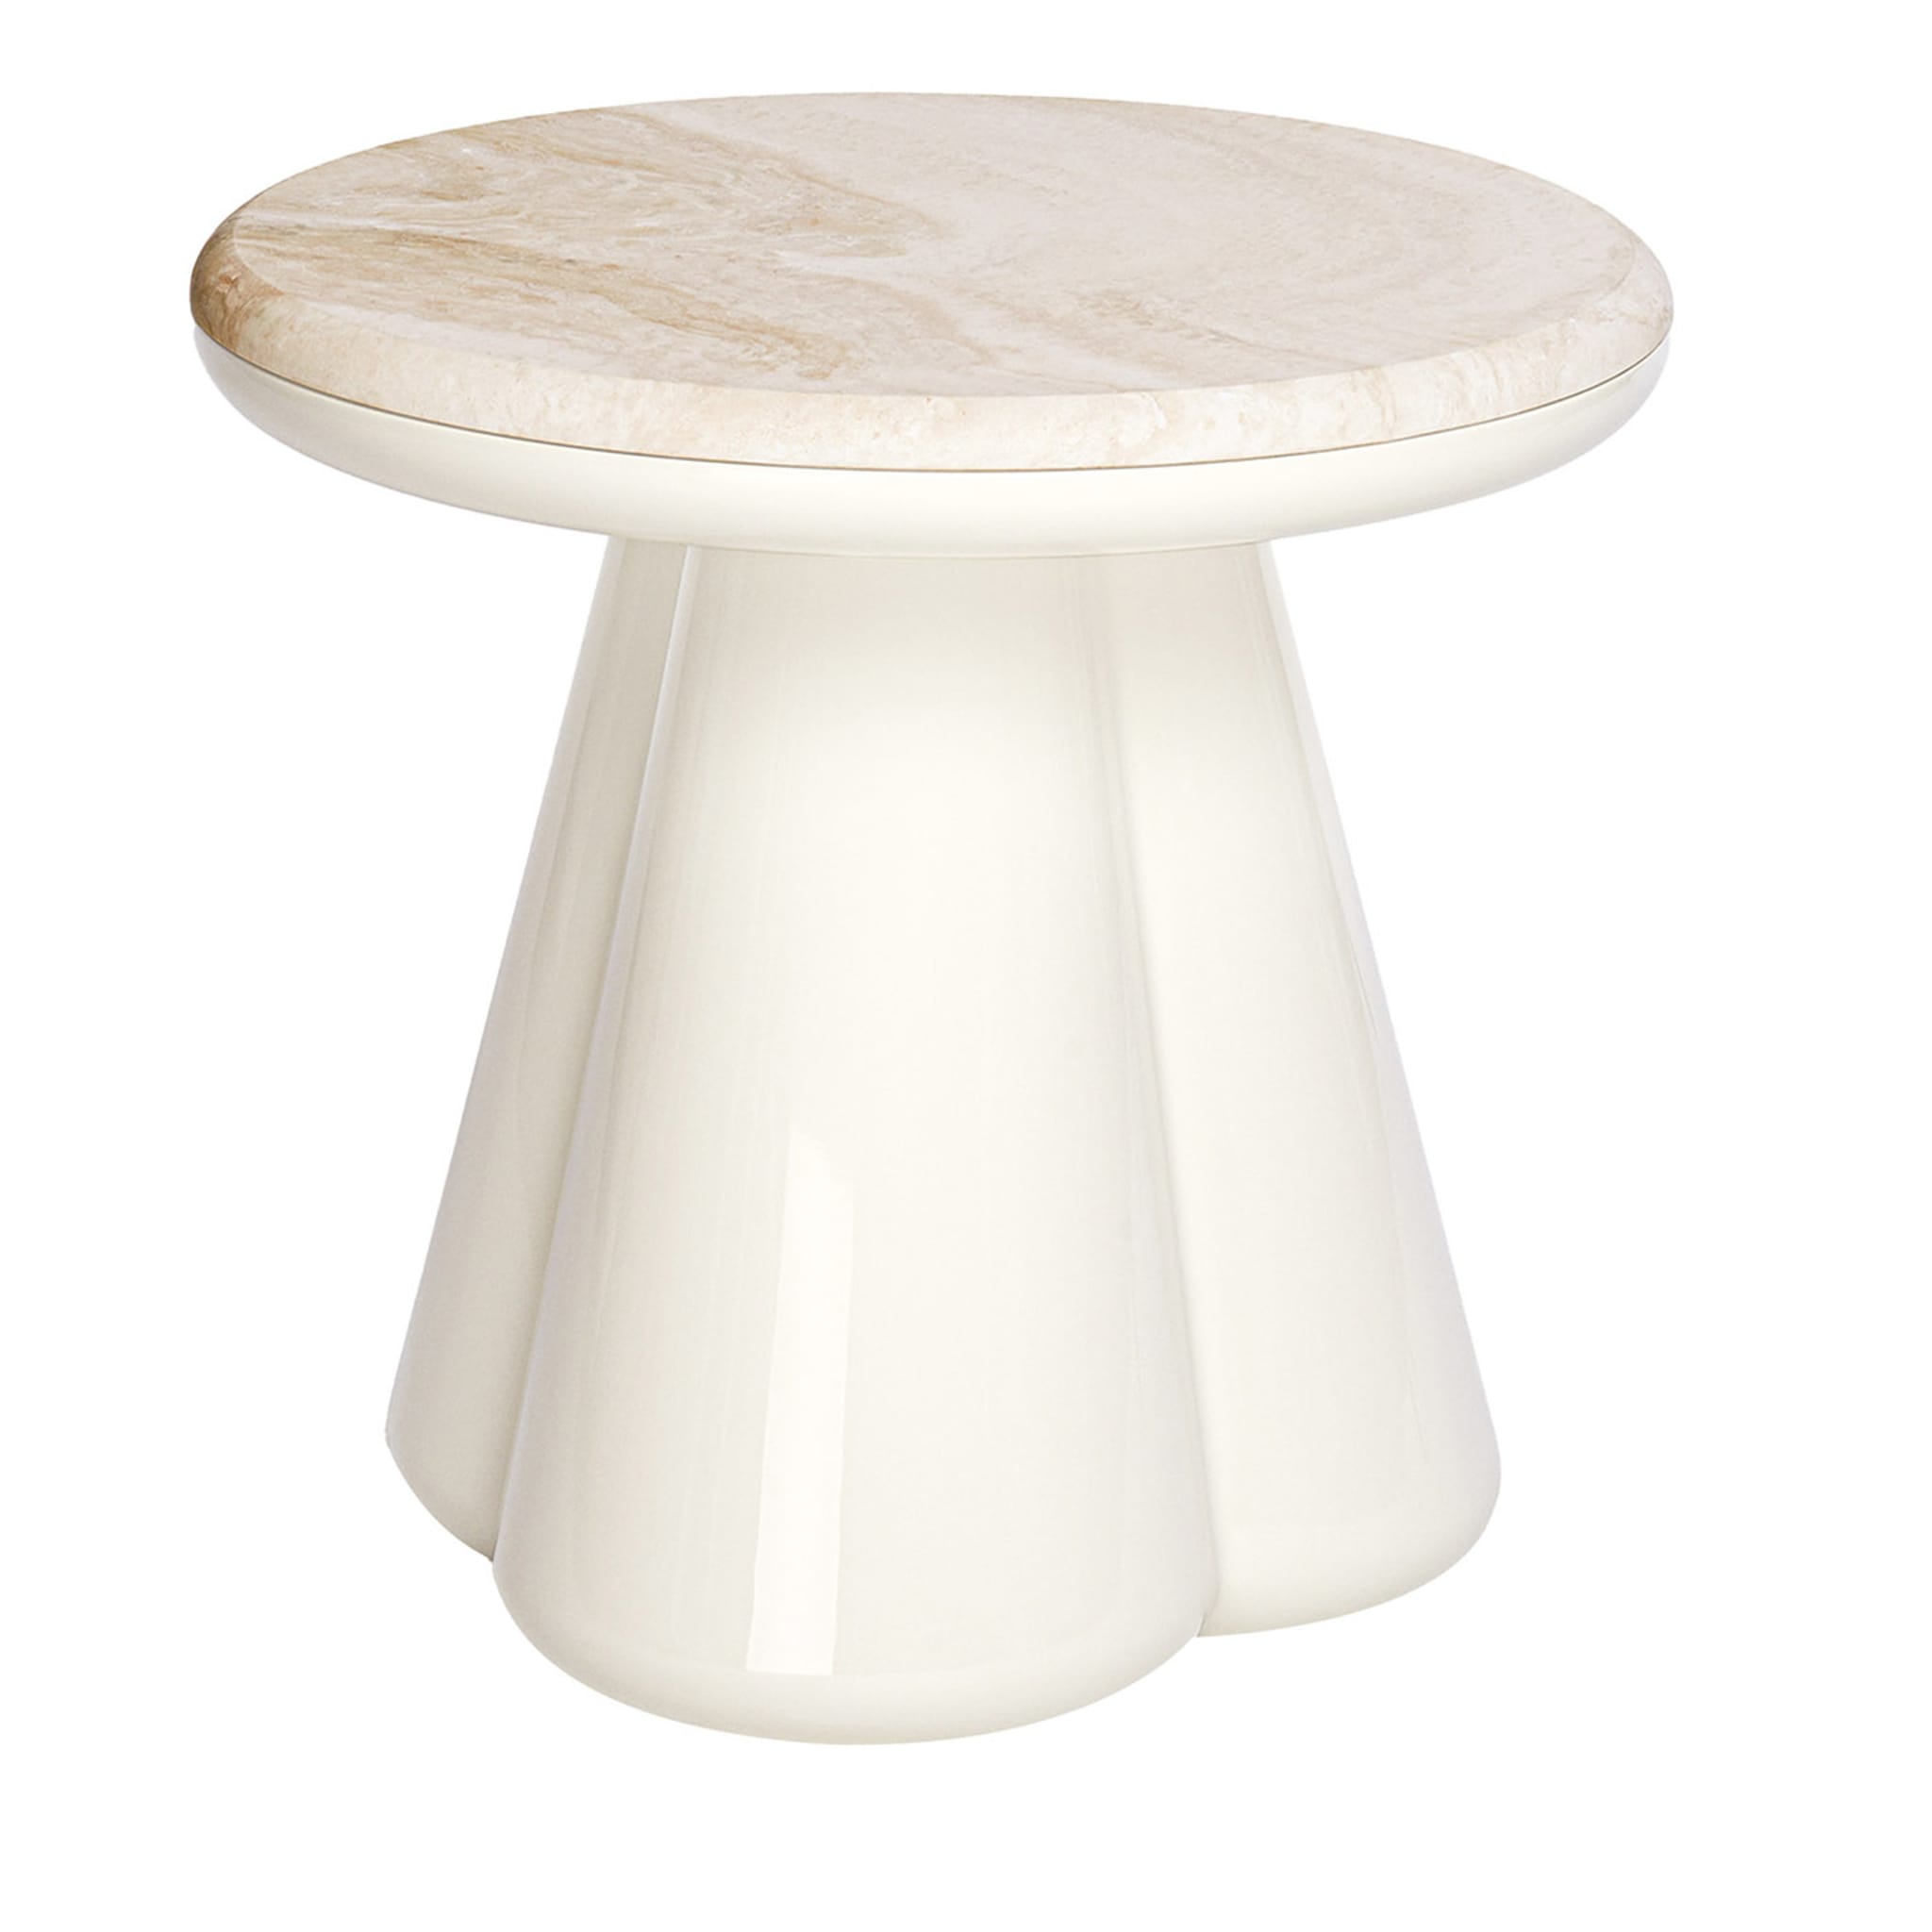 Table d'appoint blanche Anodo #2 - Vue principale